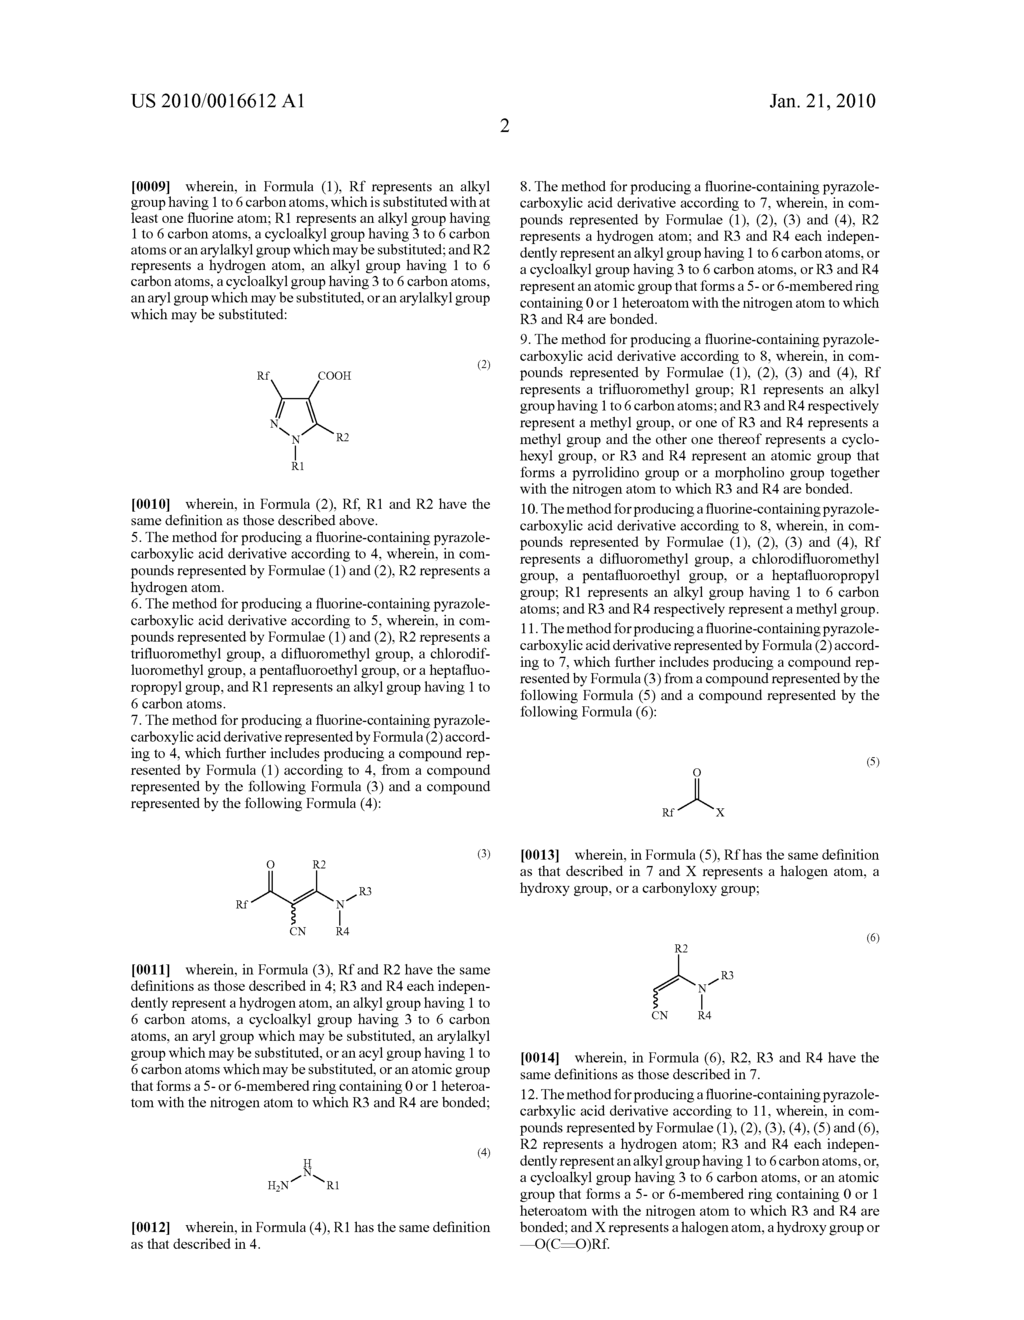 FLUORINE-CONTAINING PYRAZOLECARBONITRILE DERIVATIVE AND METHOD FOR PRODUCING THE SAME, AND FLUORINE-CONTAINING PYRAZOLECARBOXYLIC ACID DERIVATIVE OBTAINED BY USING THE FLUORINE-CONTAINING PYRAZOLECARBONITRILE DERIVATIVE AND METHOD FOR PRODUCING THE SAME - diagram, schematic, and image 03